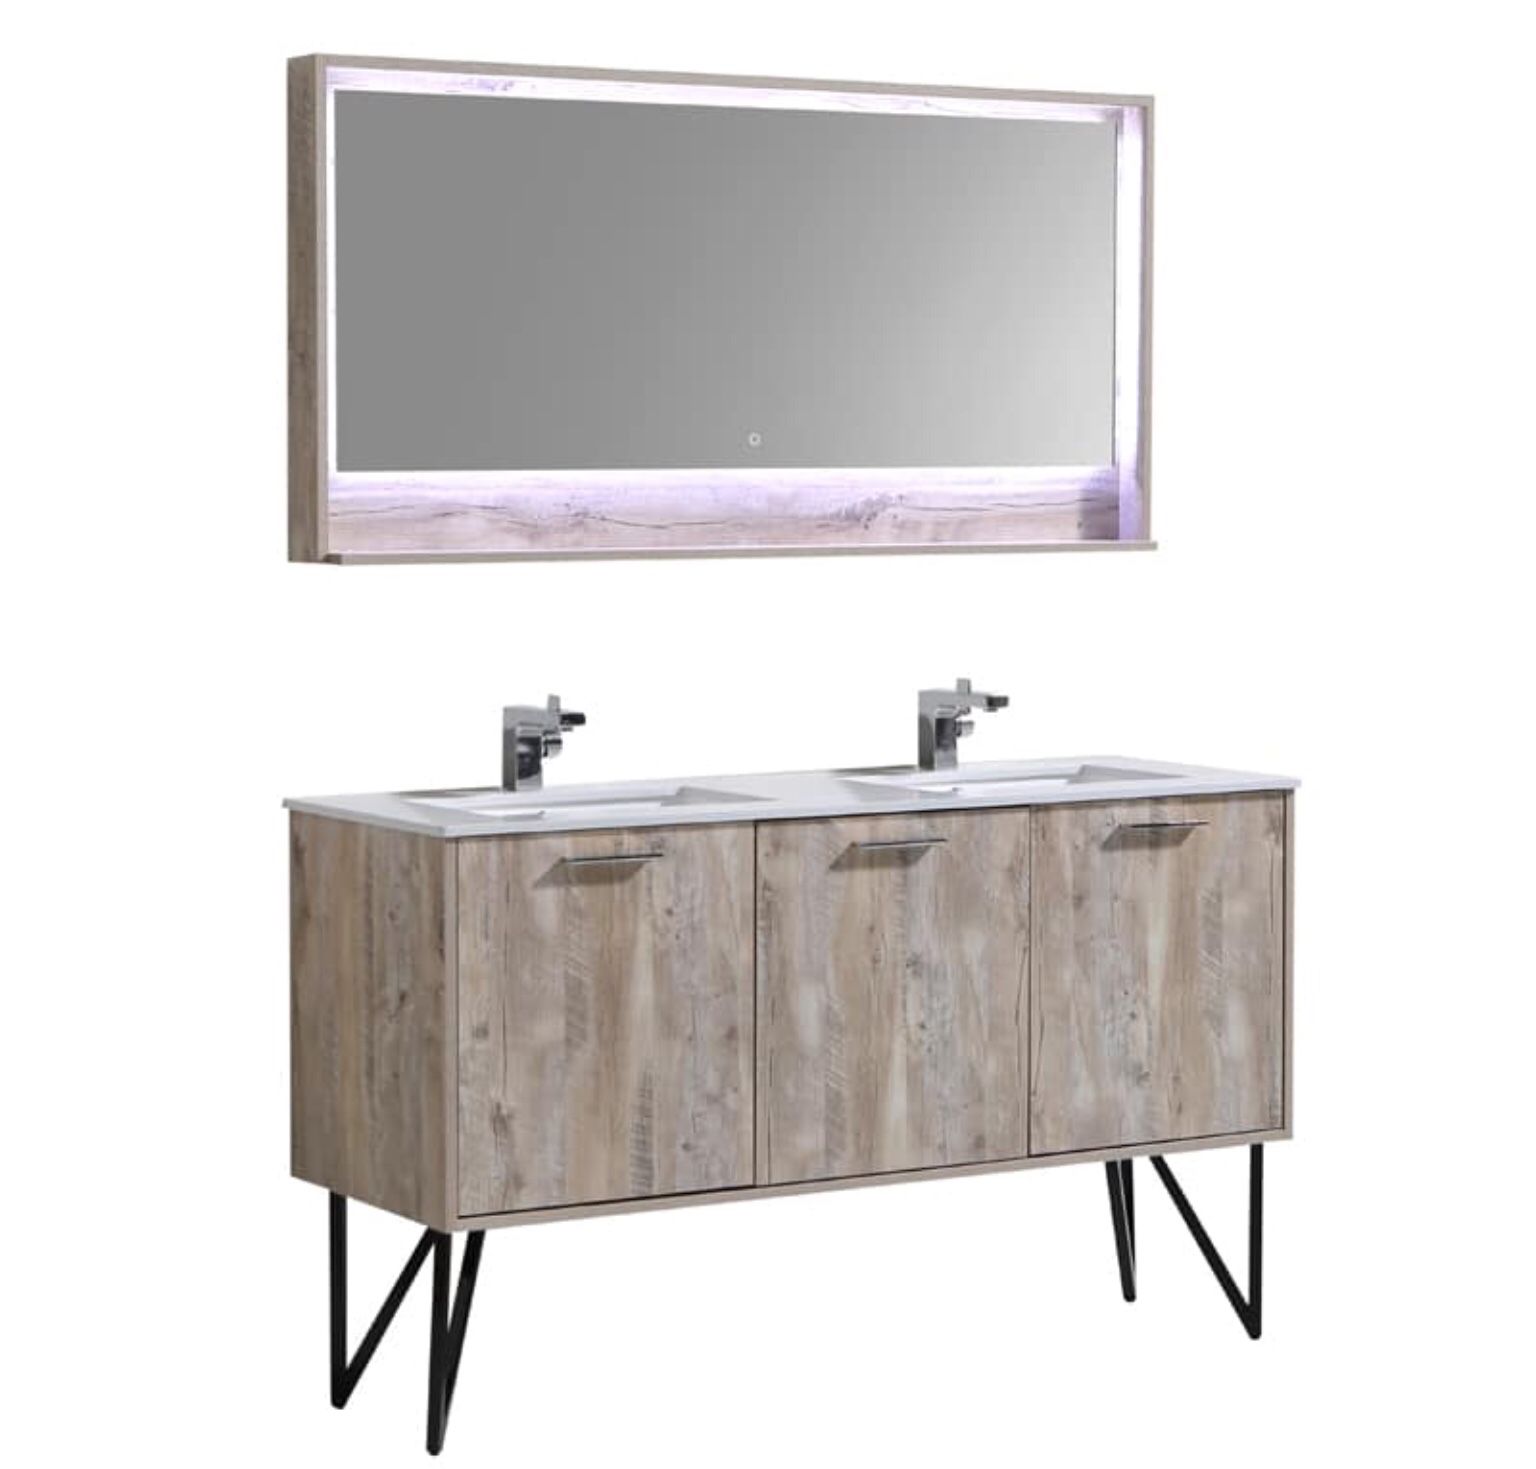 VANITY IN DIFFERENTSIZES, CALL US FOR MORE INFORMATION